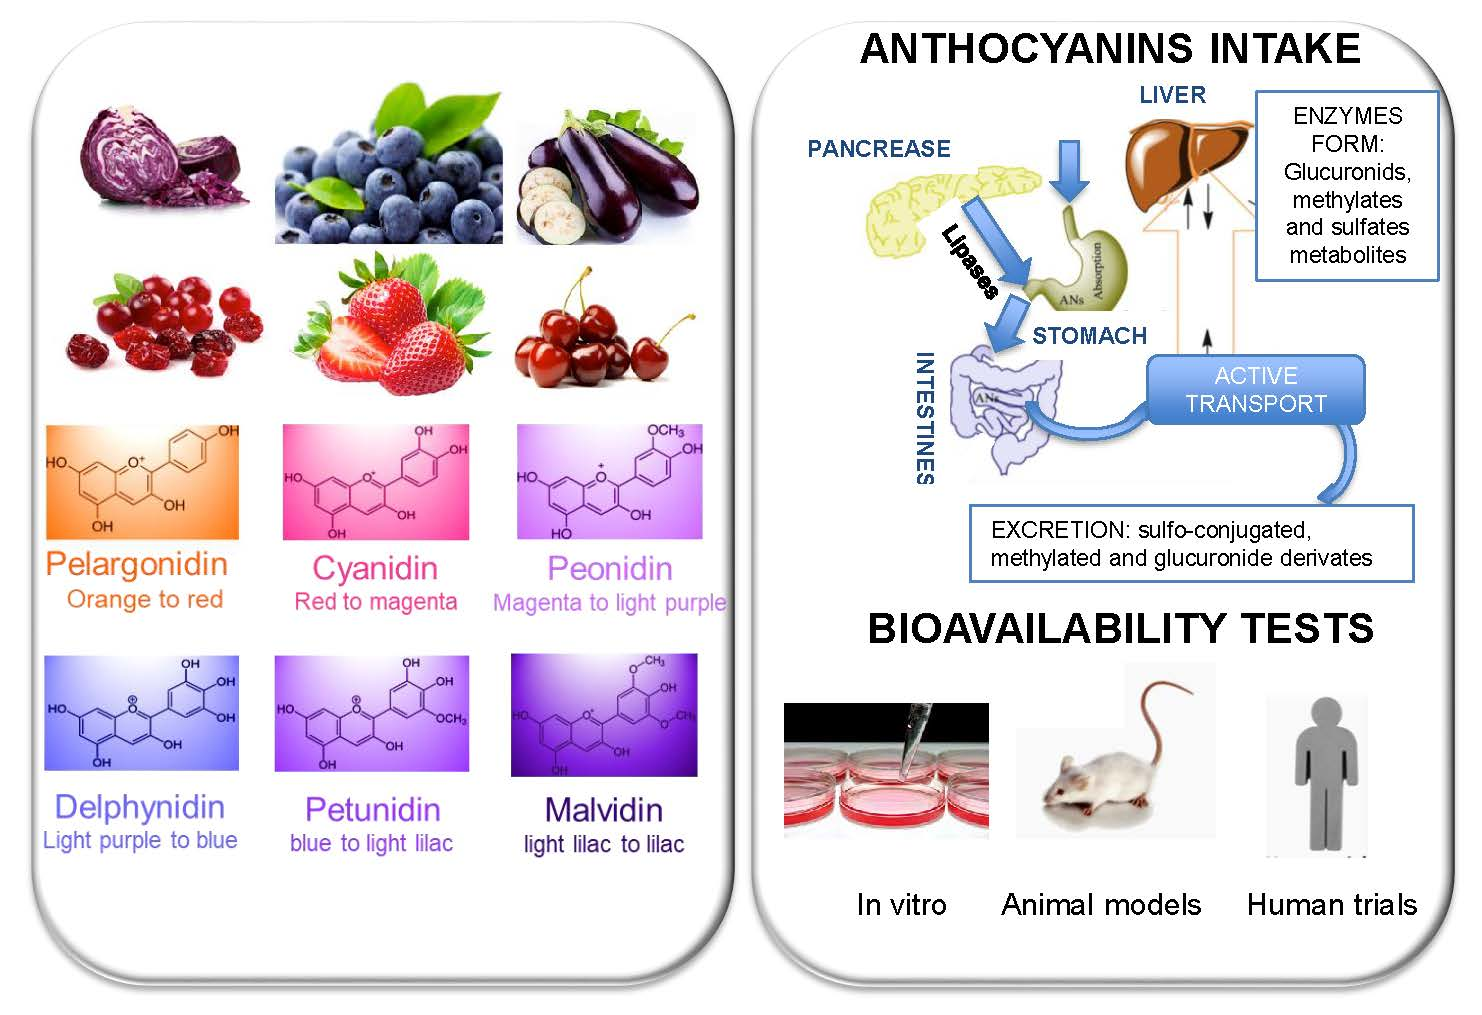 Anthocyanins and immune system support